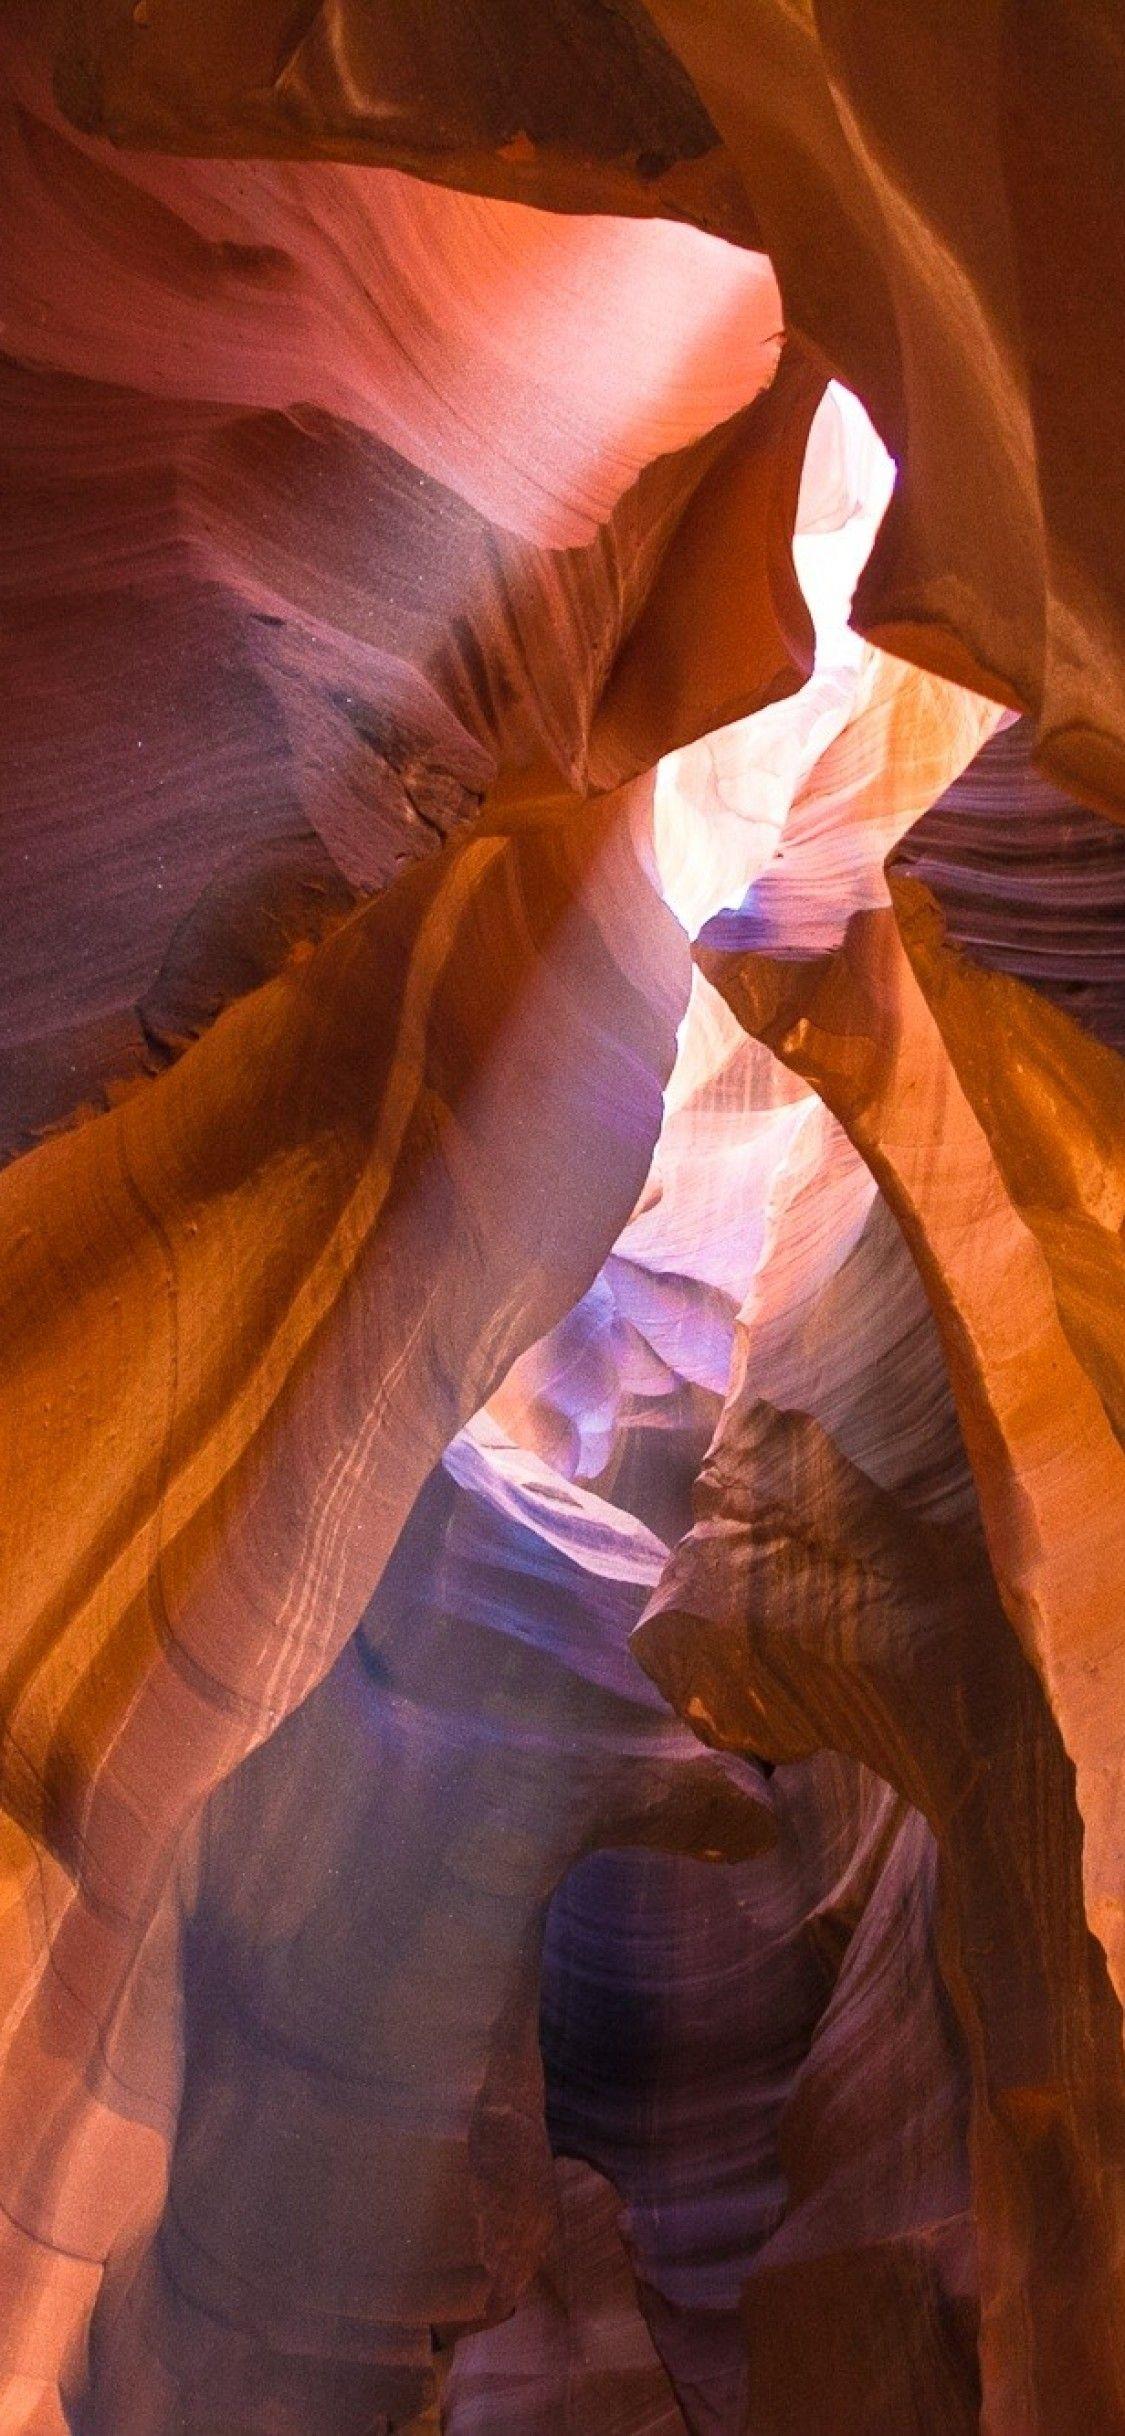 Antelope Canyon Pictures Stunning  Download Free Images on Unsplash